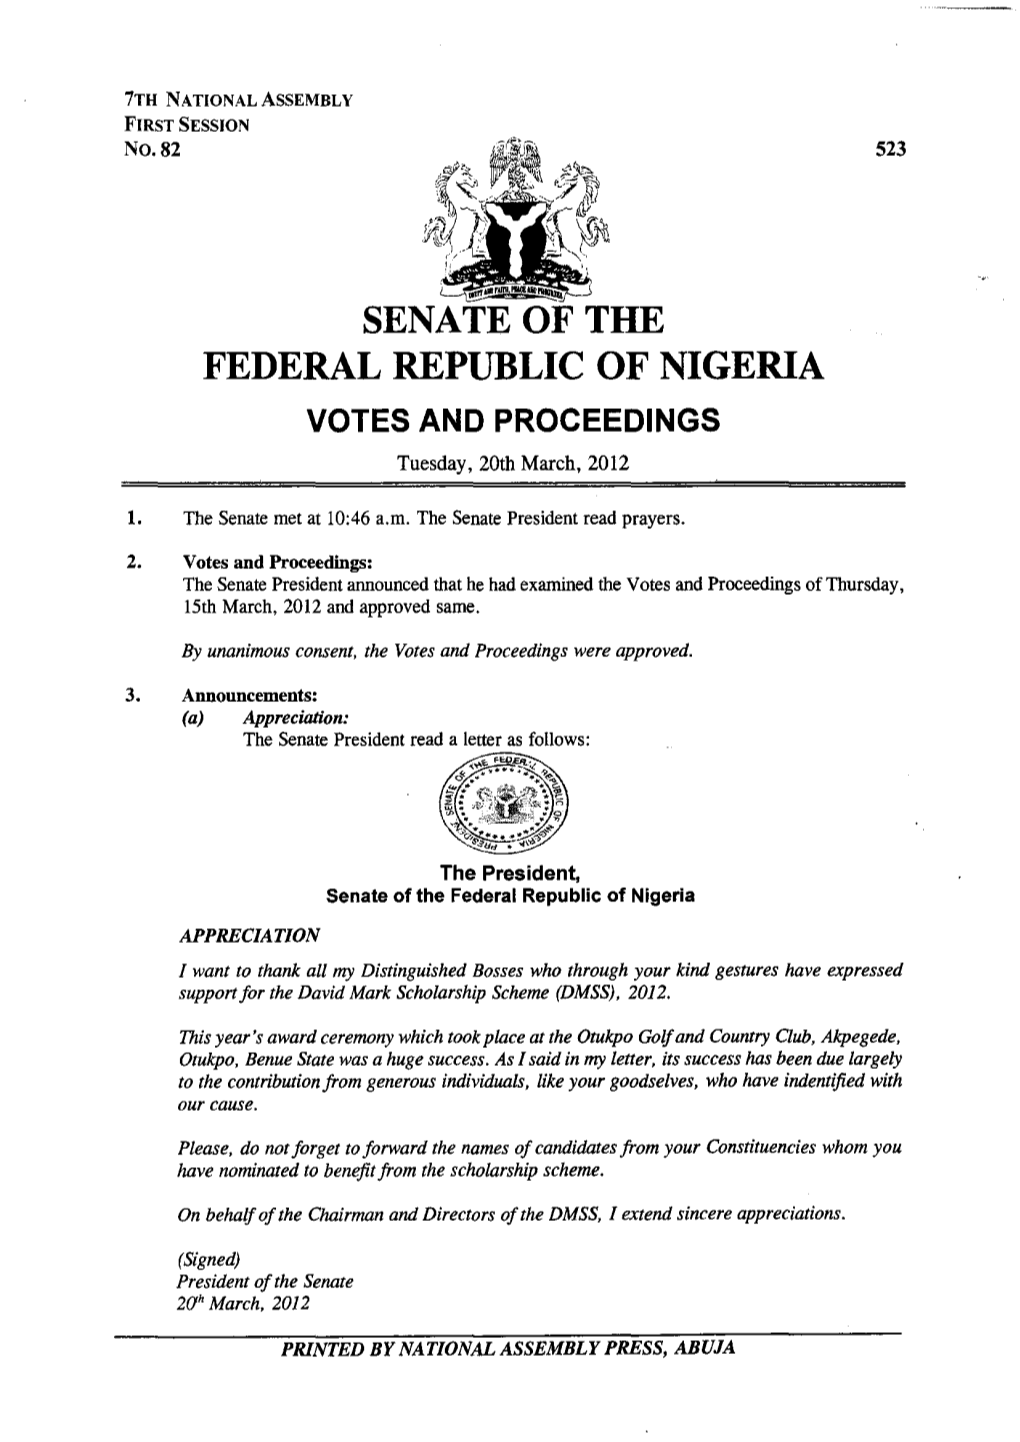 SENATE of the FEDERAL REPUBLIC of NIGERIA VOTES and PROCEEDINGS Tuesday, 20Th March, 2012